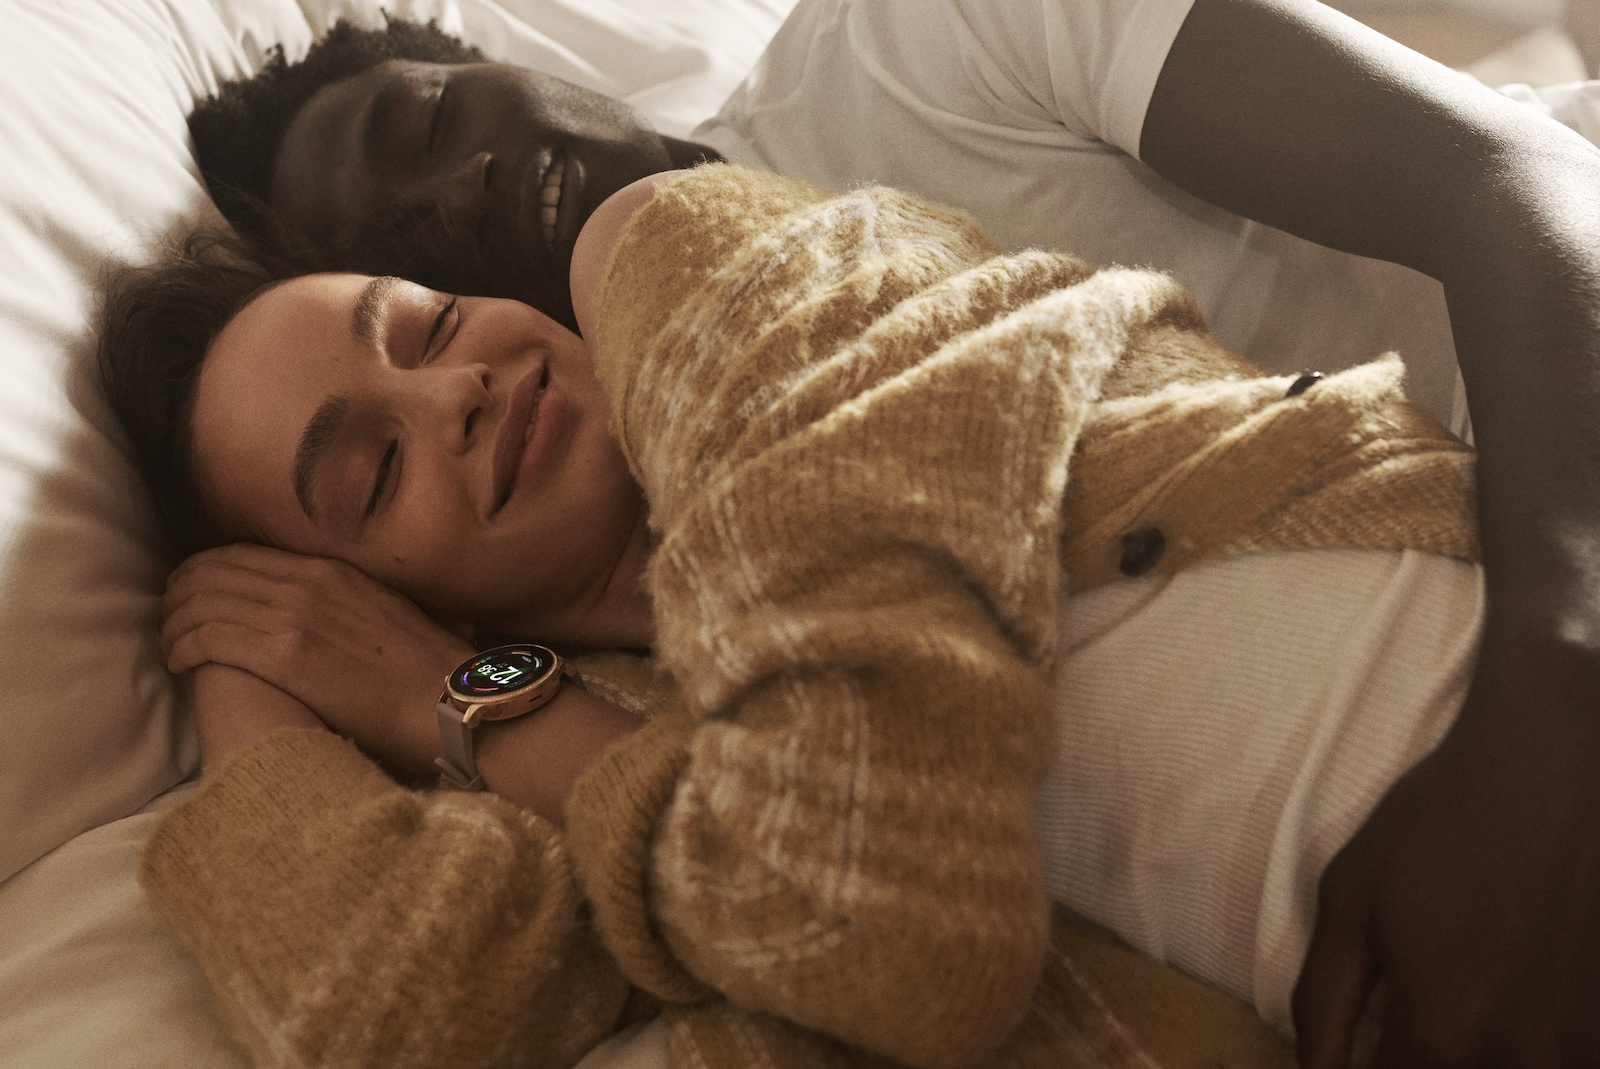 A man and a woman taking a nap with a Gen 6 smartwatch showing colorful charging rings. .